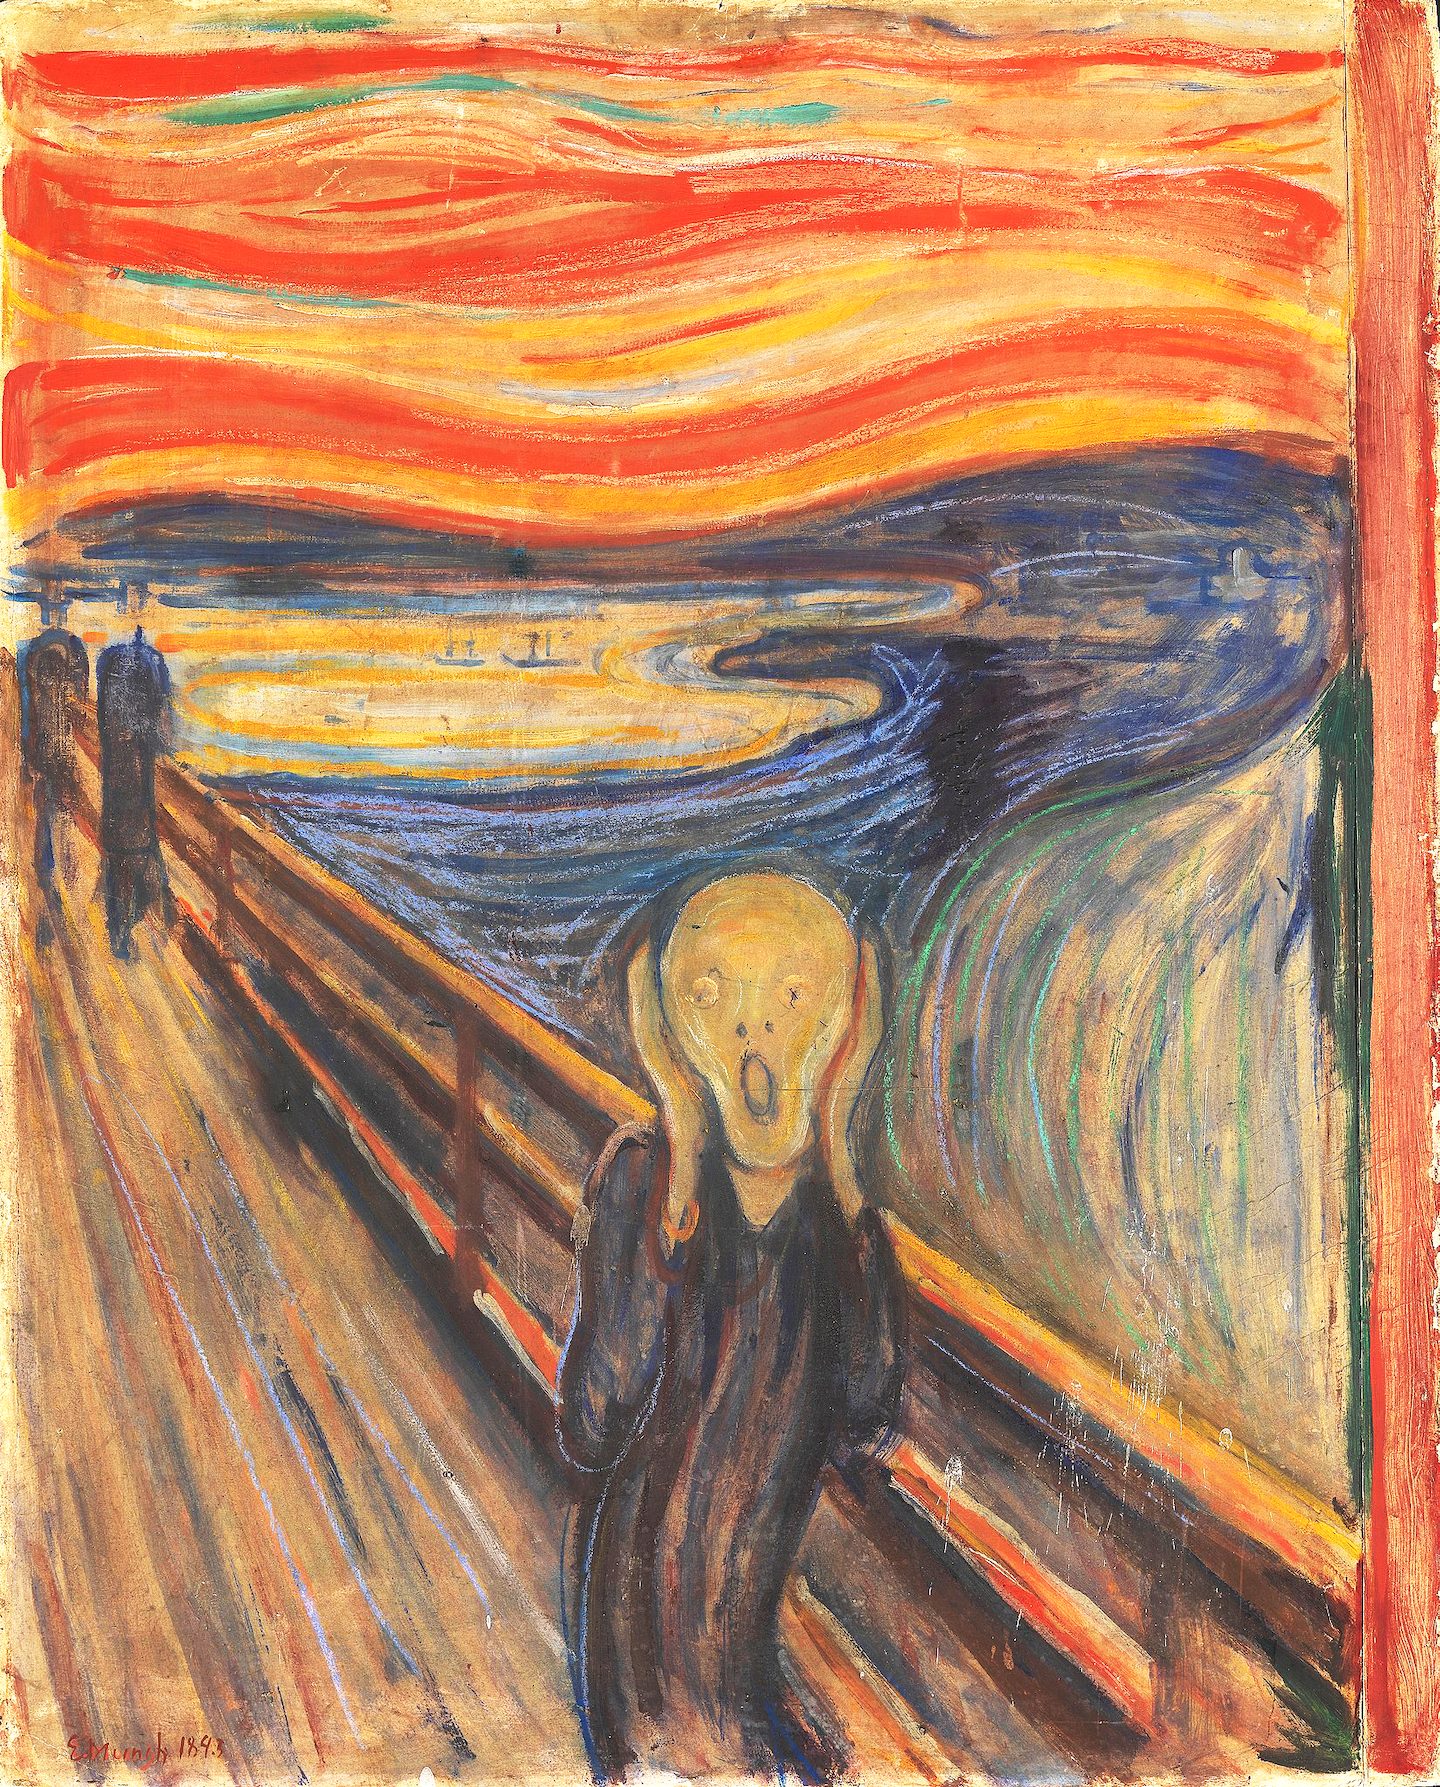 The Scream, a painting of an abstract person-like figure standing on a bridge, with their head in between their hands. The person's eyes and mouth are wide open. The person is wearing a long, dark coat. The background is a mix of blue, yellow and orange, with a stormy sky and a lake in the background.